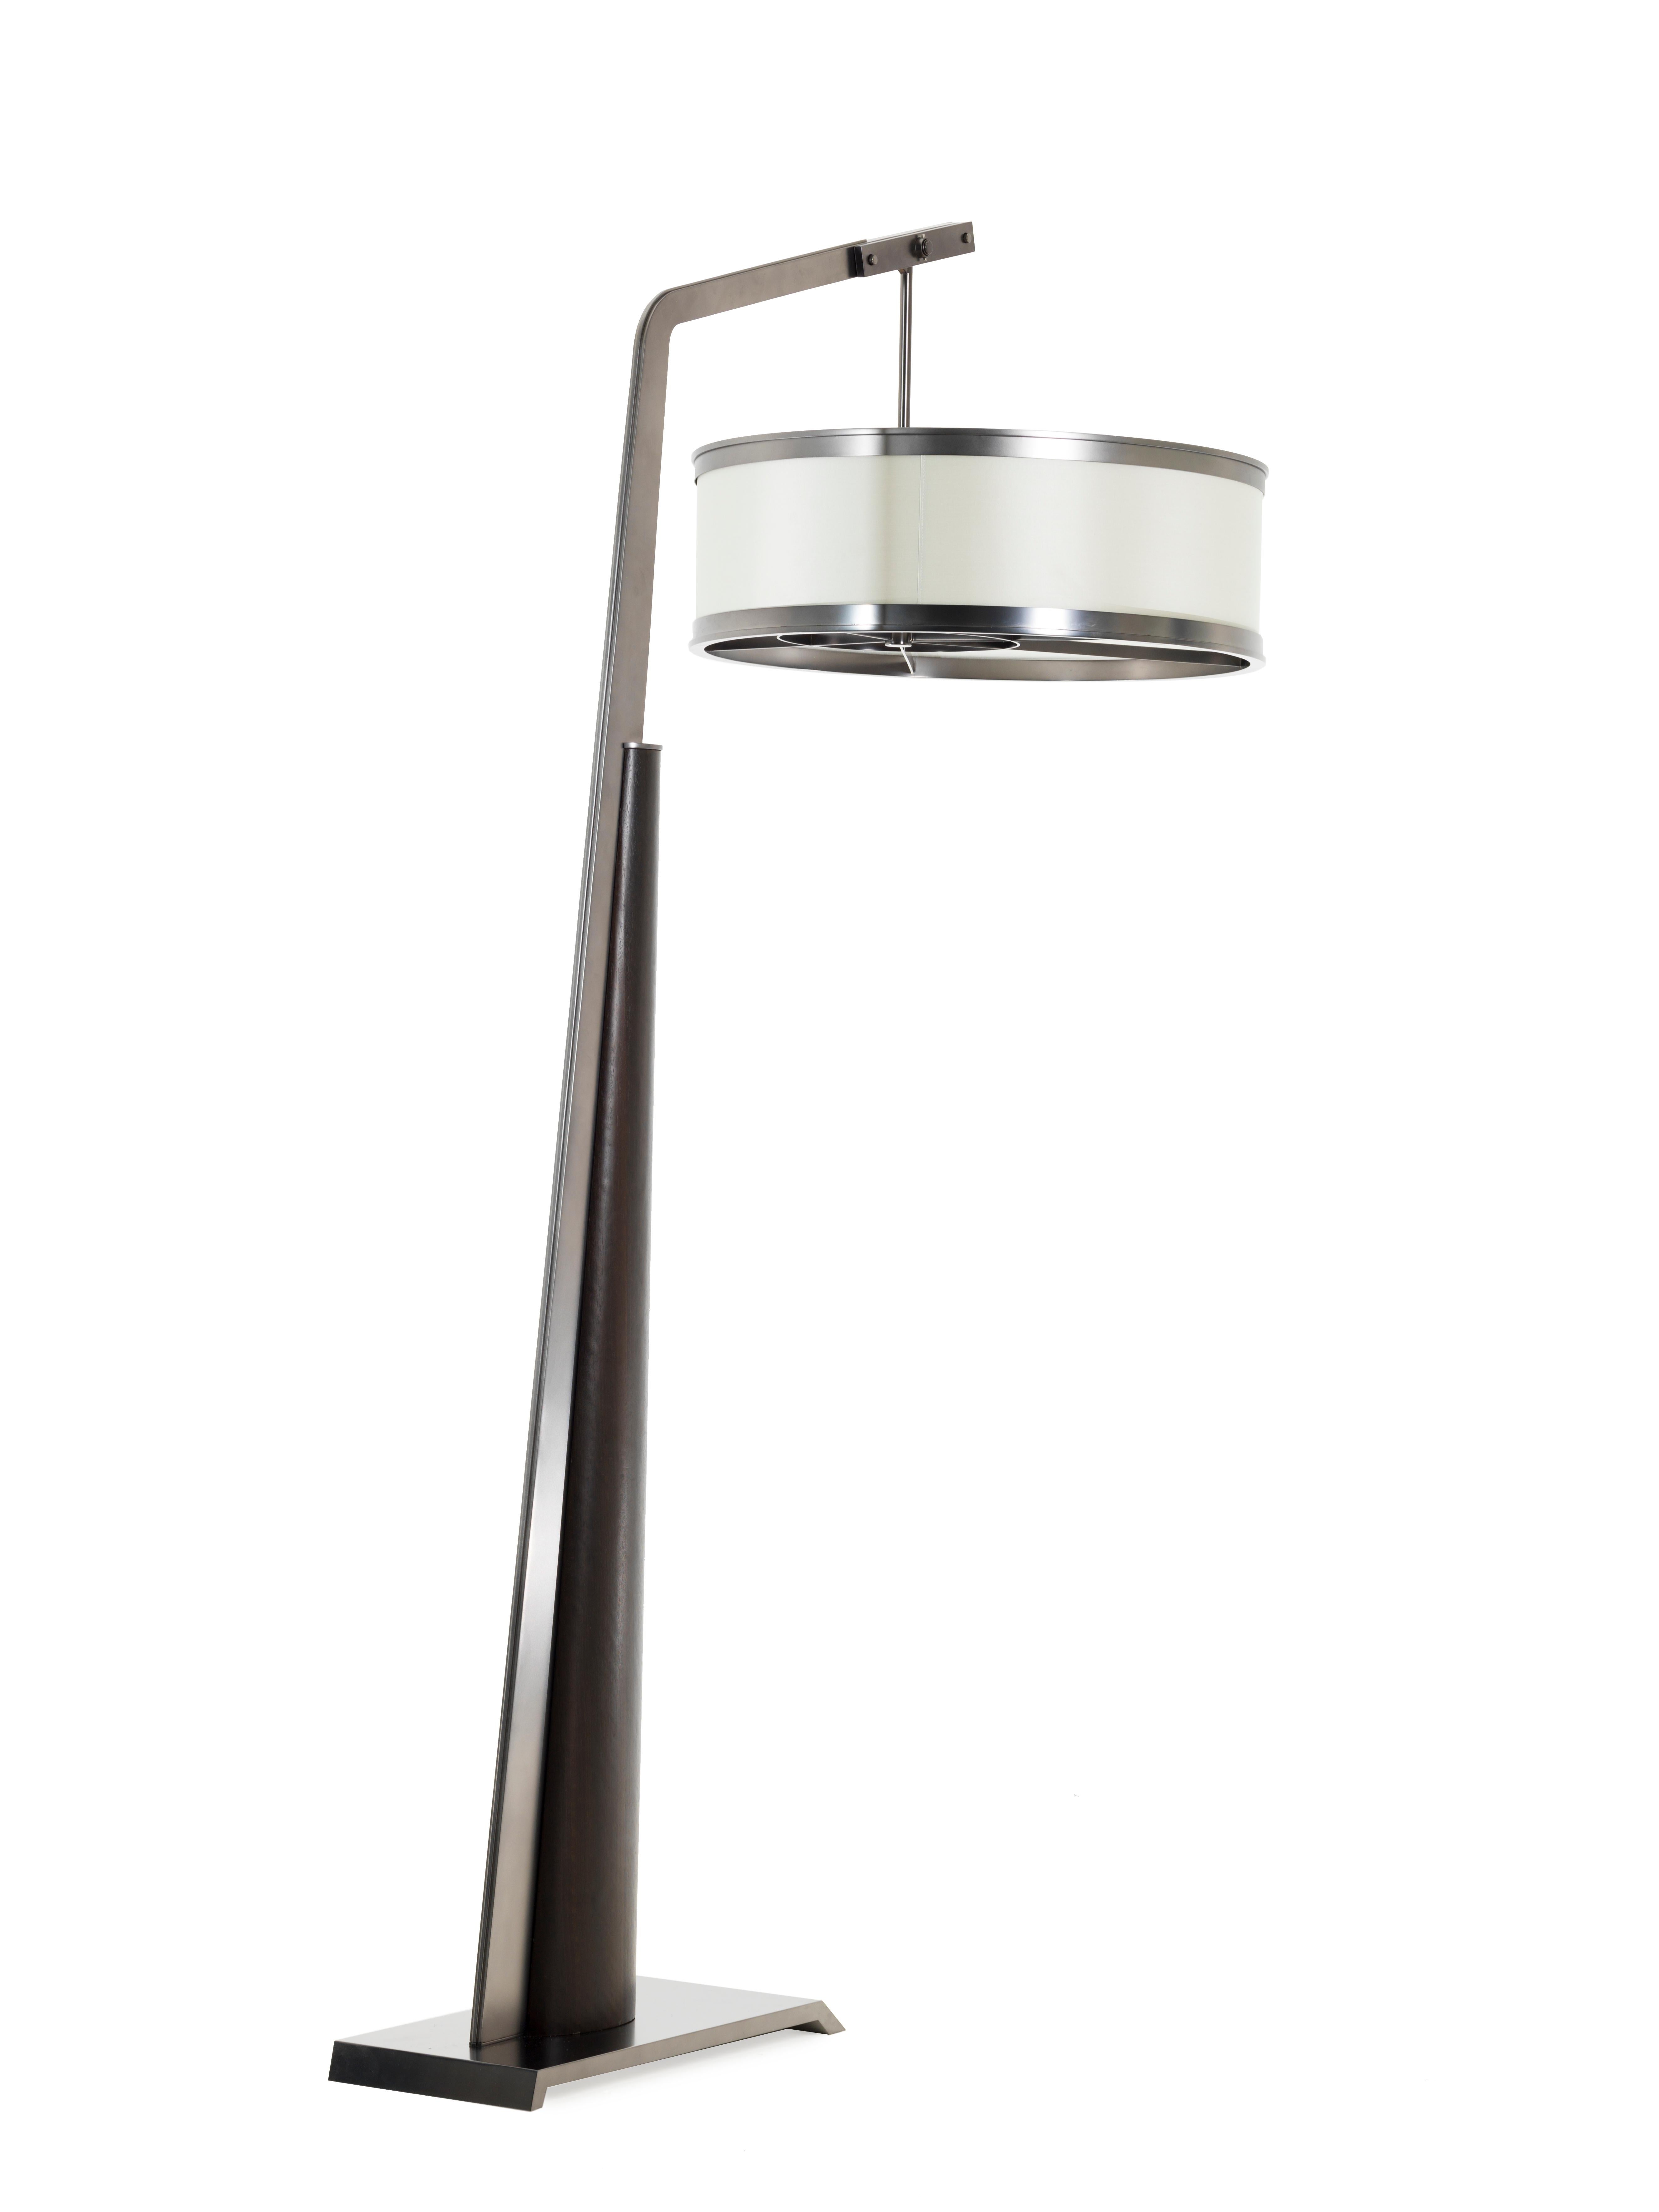 Mintaka Modern Architectural Floor Lamp with Art-Deco Vibes For Sale 2